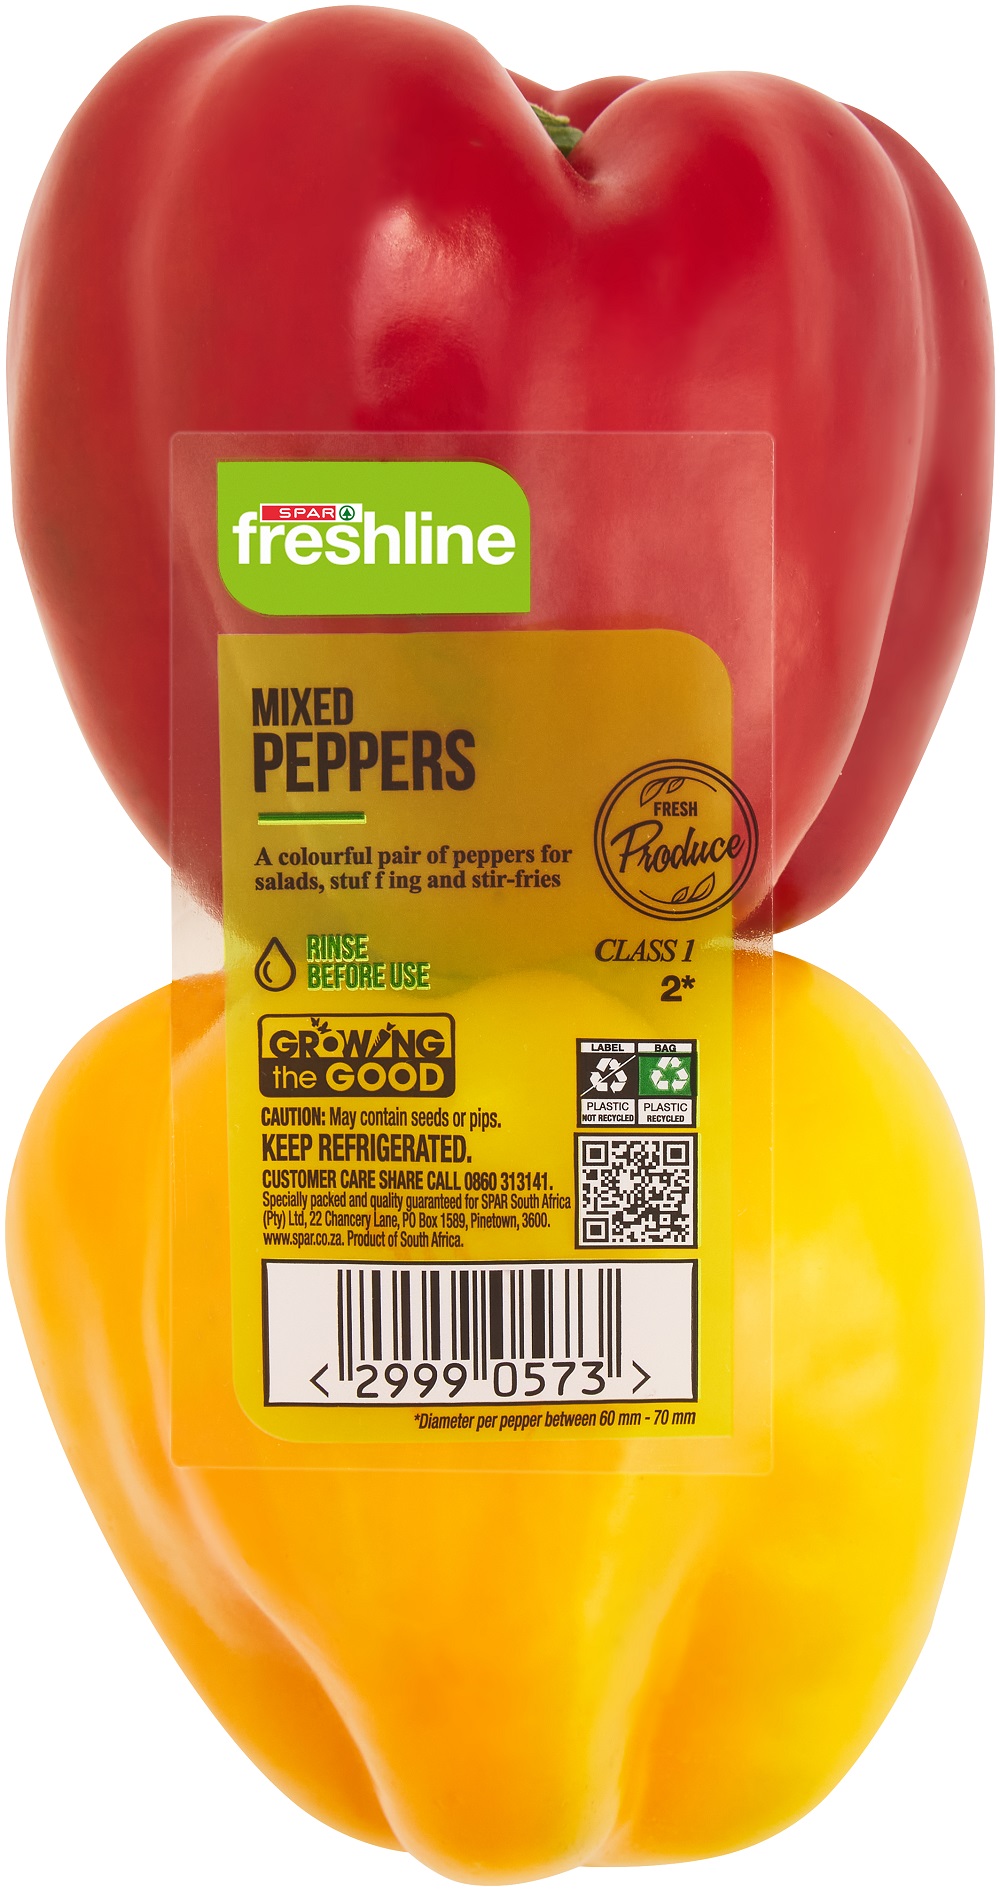 freshline mixed peppers